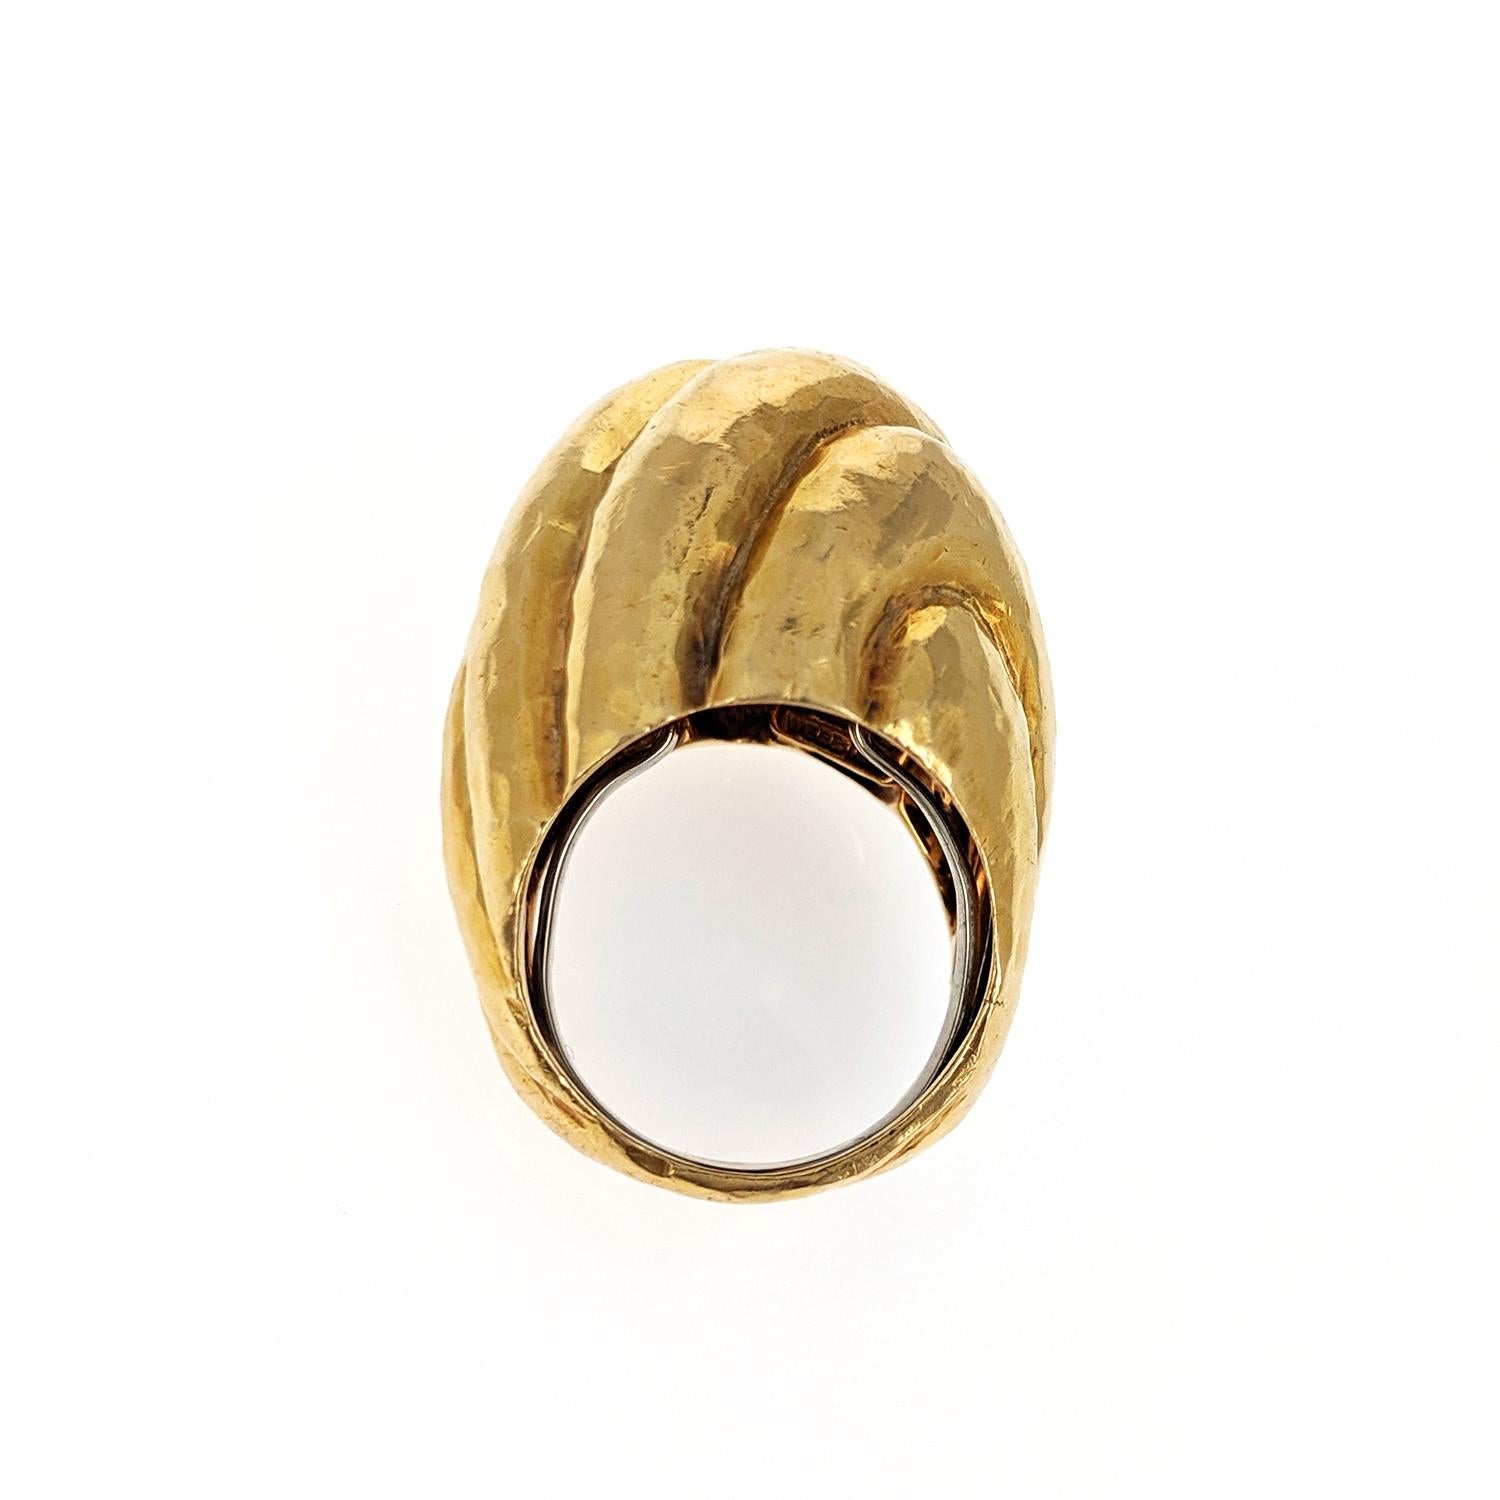 An 18k yellow gold ring, in a hammered metalwork texture, with a fluted, high bombe design. Signed Webb. Size 7.5.